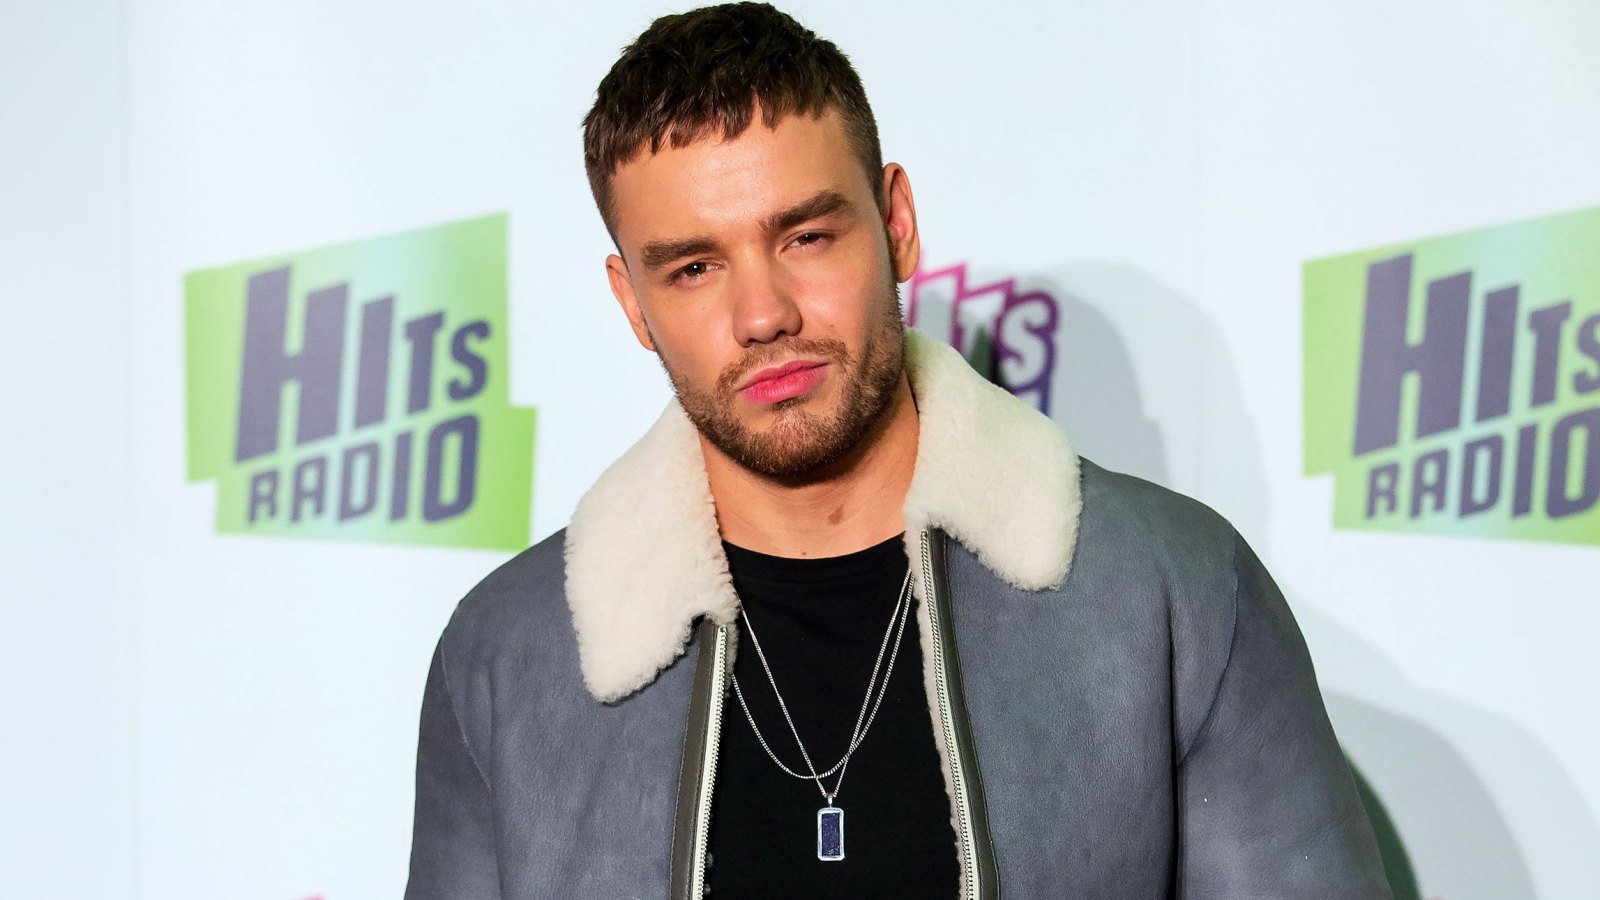 Liam Payne Threatens to Sue San Antonio Bar After Getting Into Fight With Bouncers